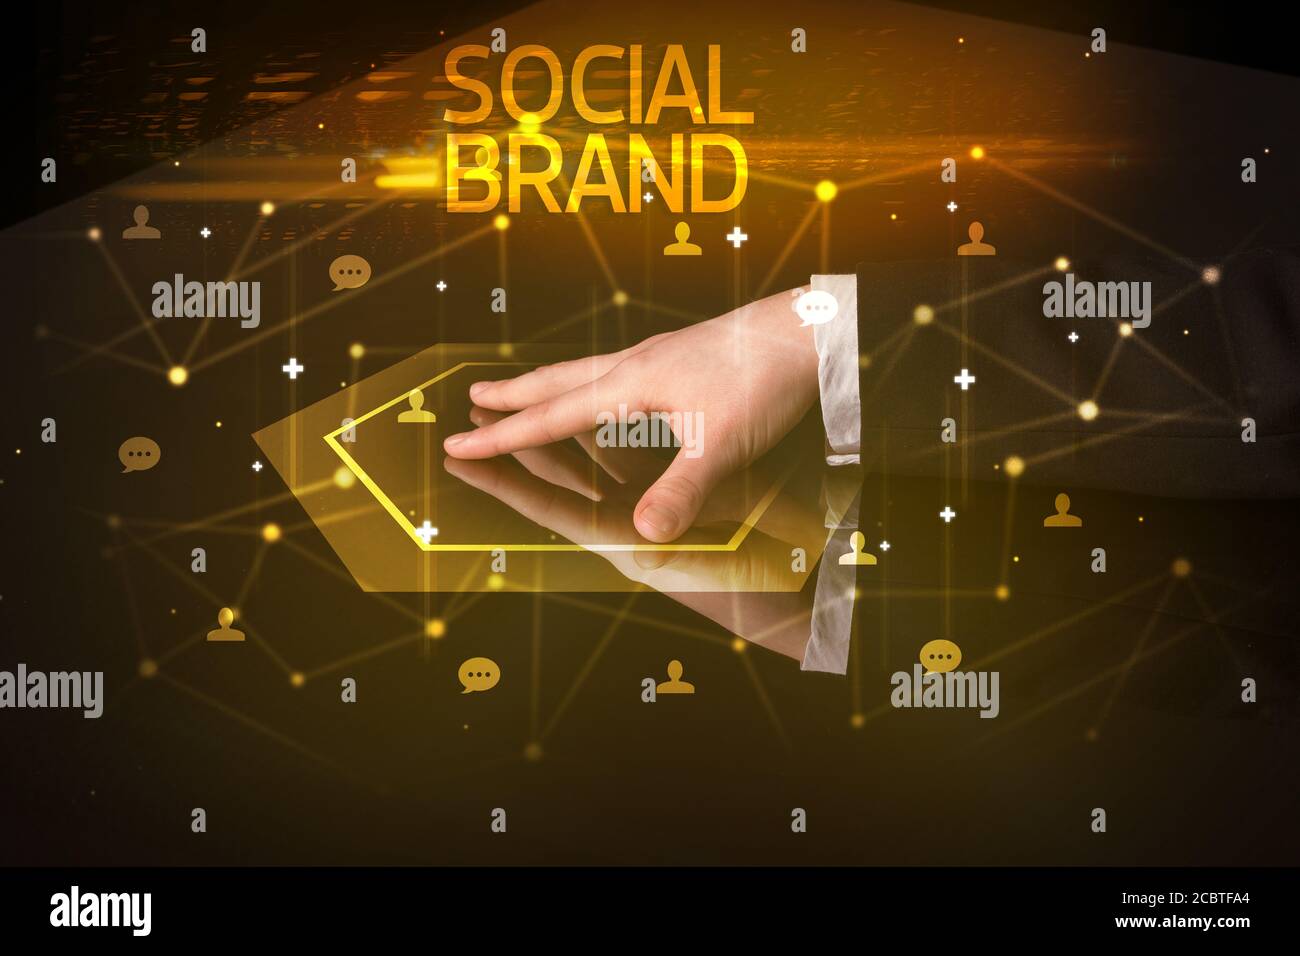 Navigating social networking with SOCIAL BRAND inscription, new media concept Stock Photo